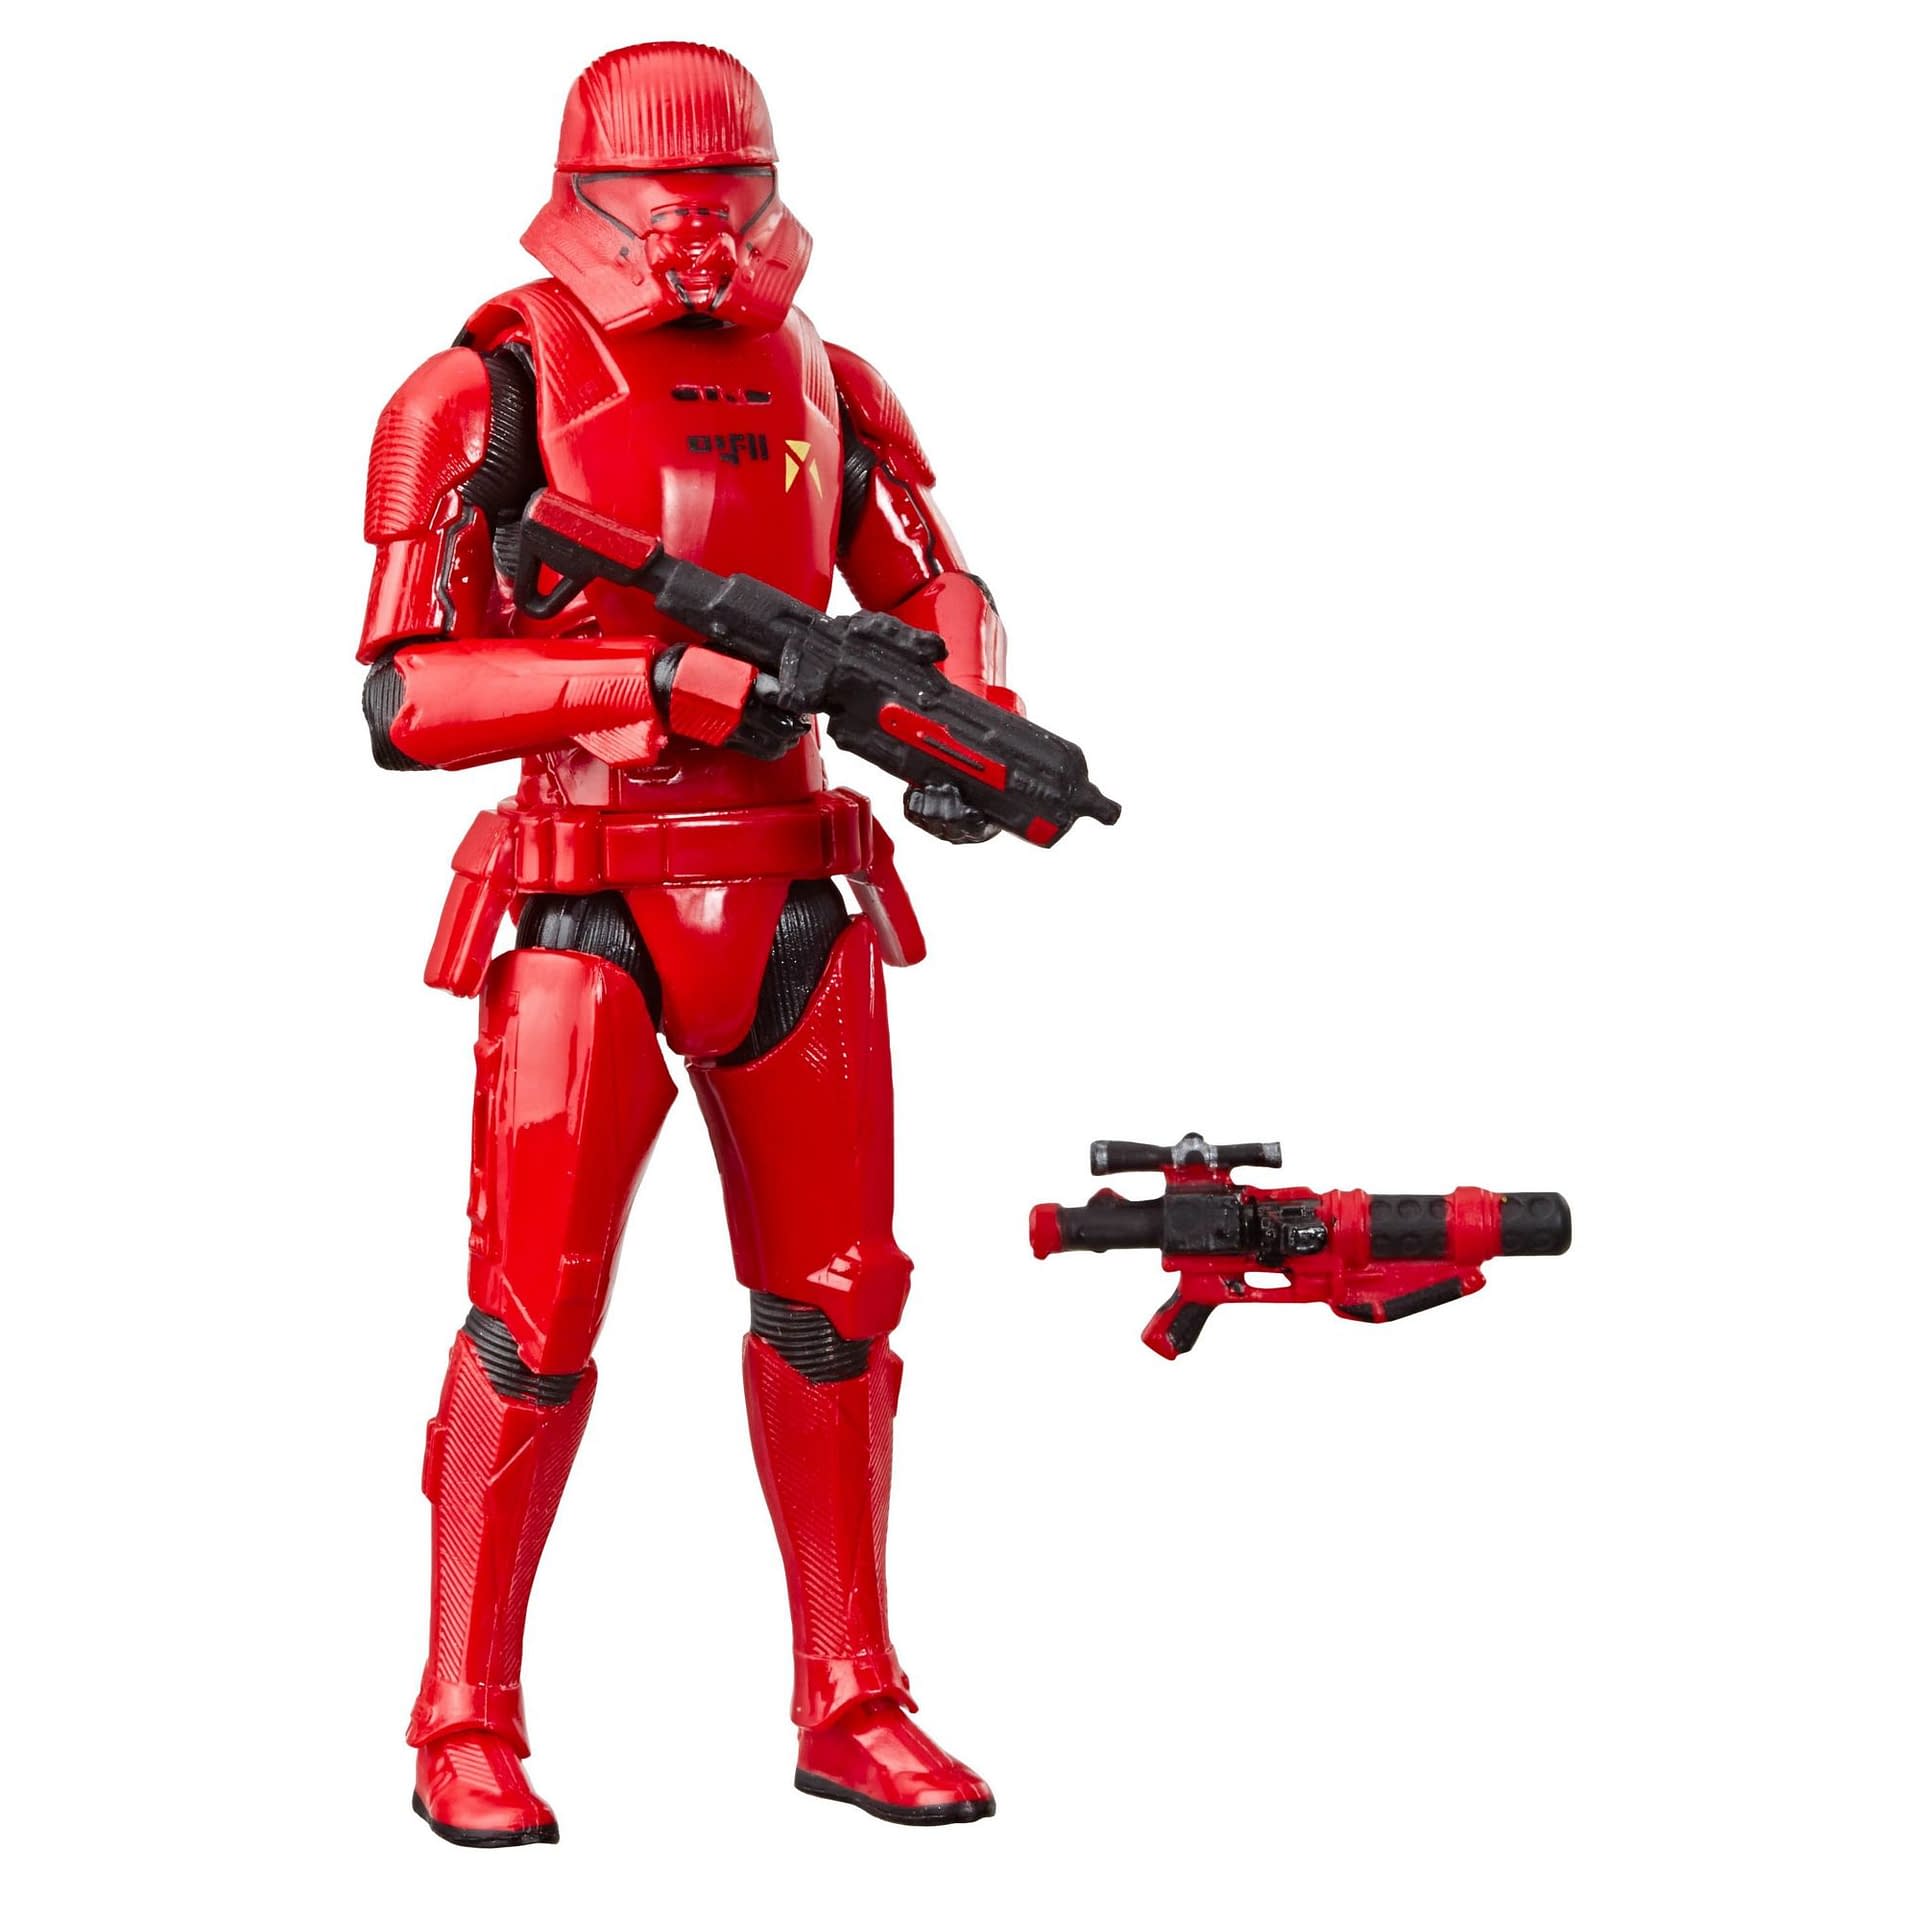 Star Wars: The Vintage Collection is Getting New Figures